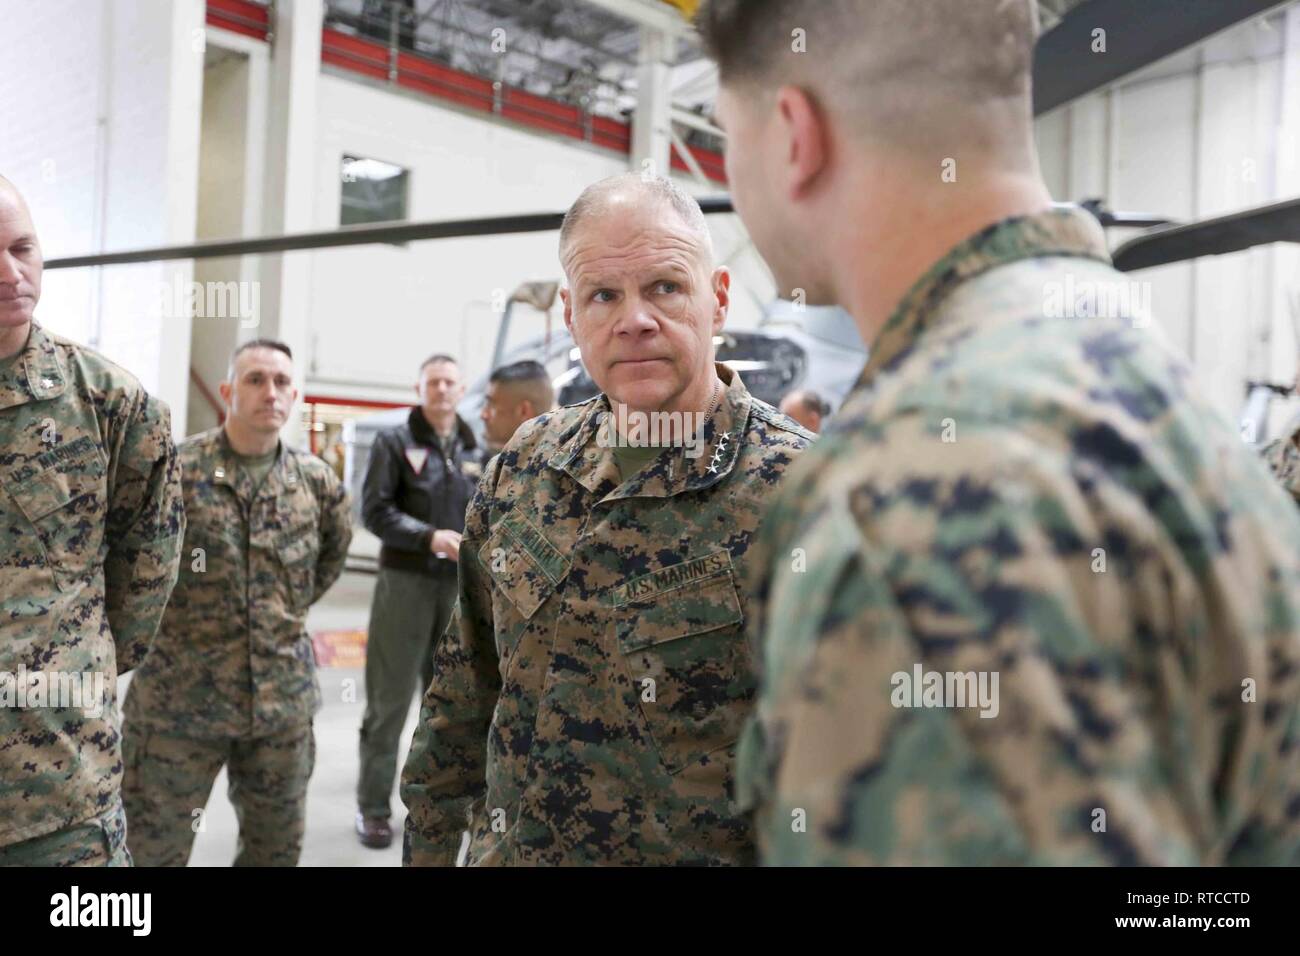 Commandant of the Marine Corps Gen. Robert B. Neller speaks with a Marine during a visit to Camp Pendleton, Calif., Feb. 13, 2019. Gen. Neller observed and discussed aviation maintenance and readiness. Stock Photo